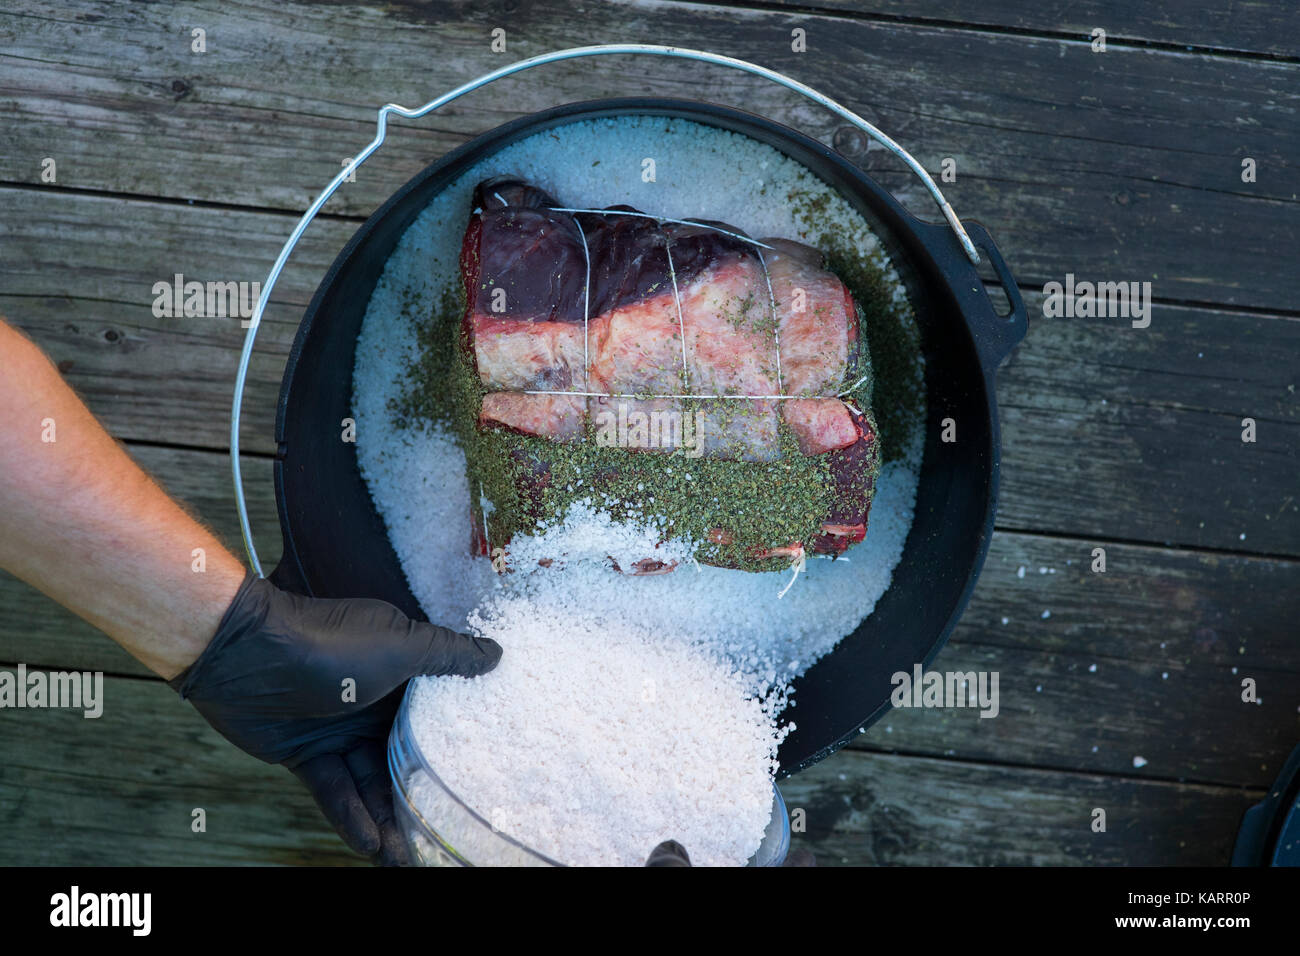 Cooking outside in a dutch oven Stock Photo